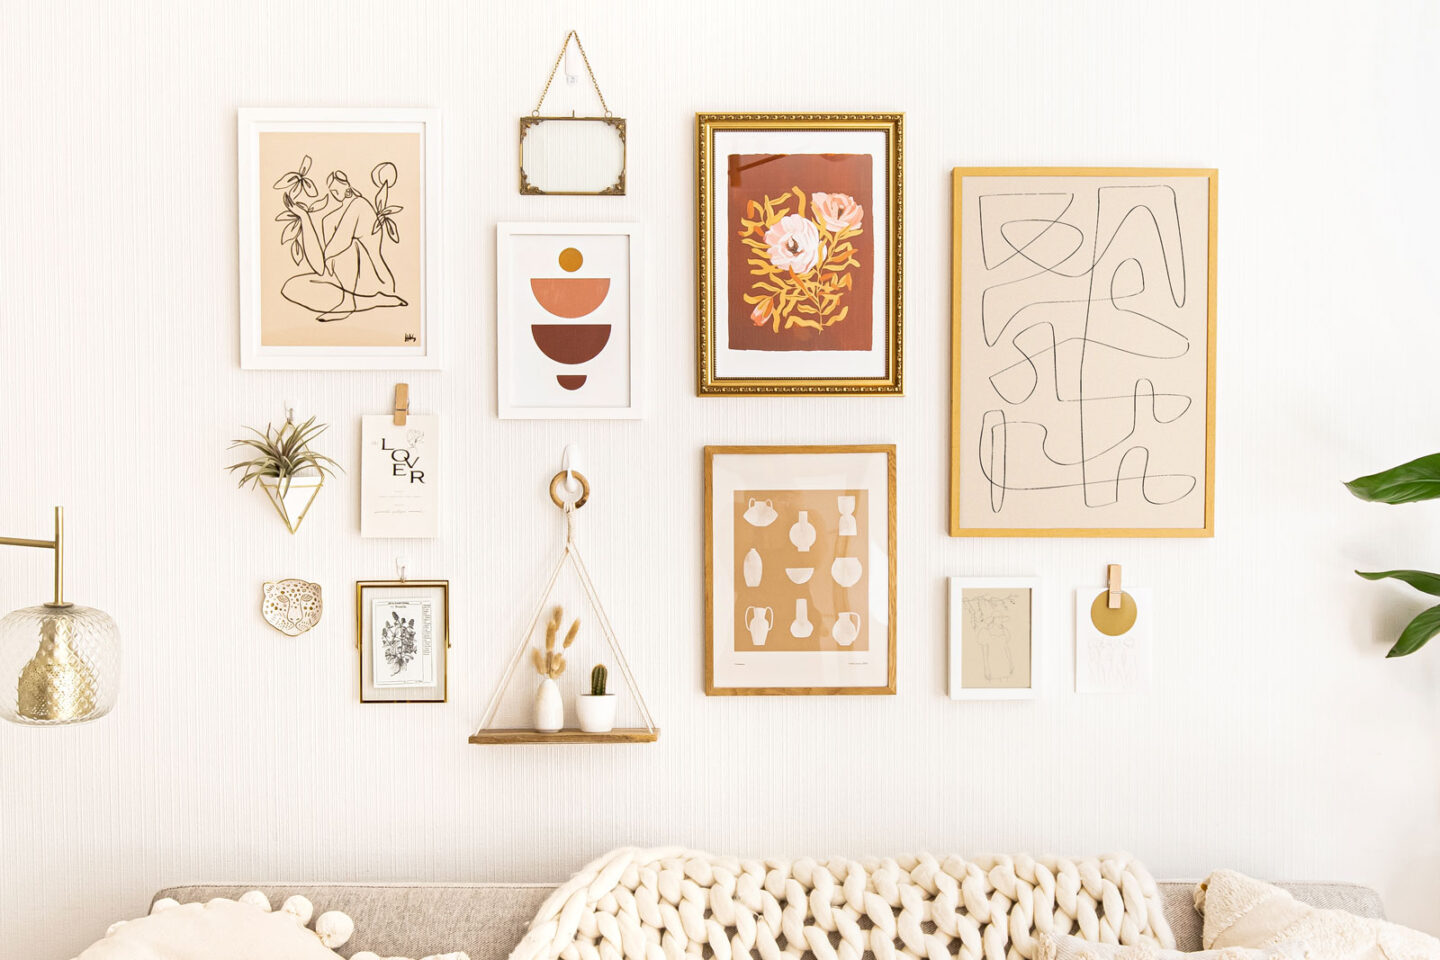 How to Create the Perfect Gallery Wall - Gallery Wall Tips – Photo Wall - Interior Decorating Tips – Kelsey Heinrichs - @kelseyinlondon - @homewithkelsey 